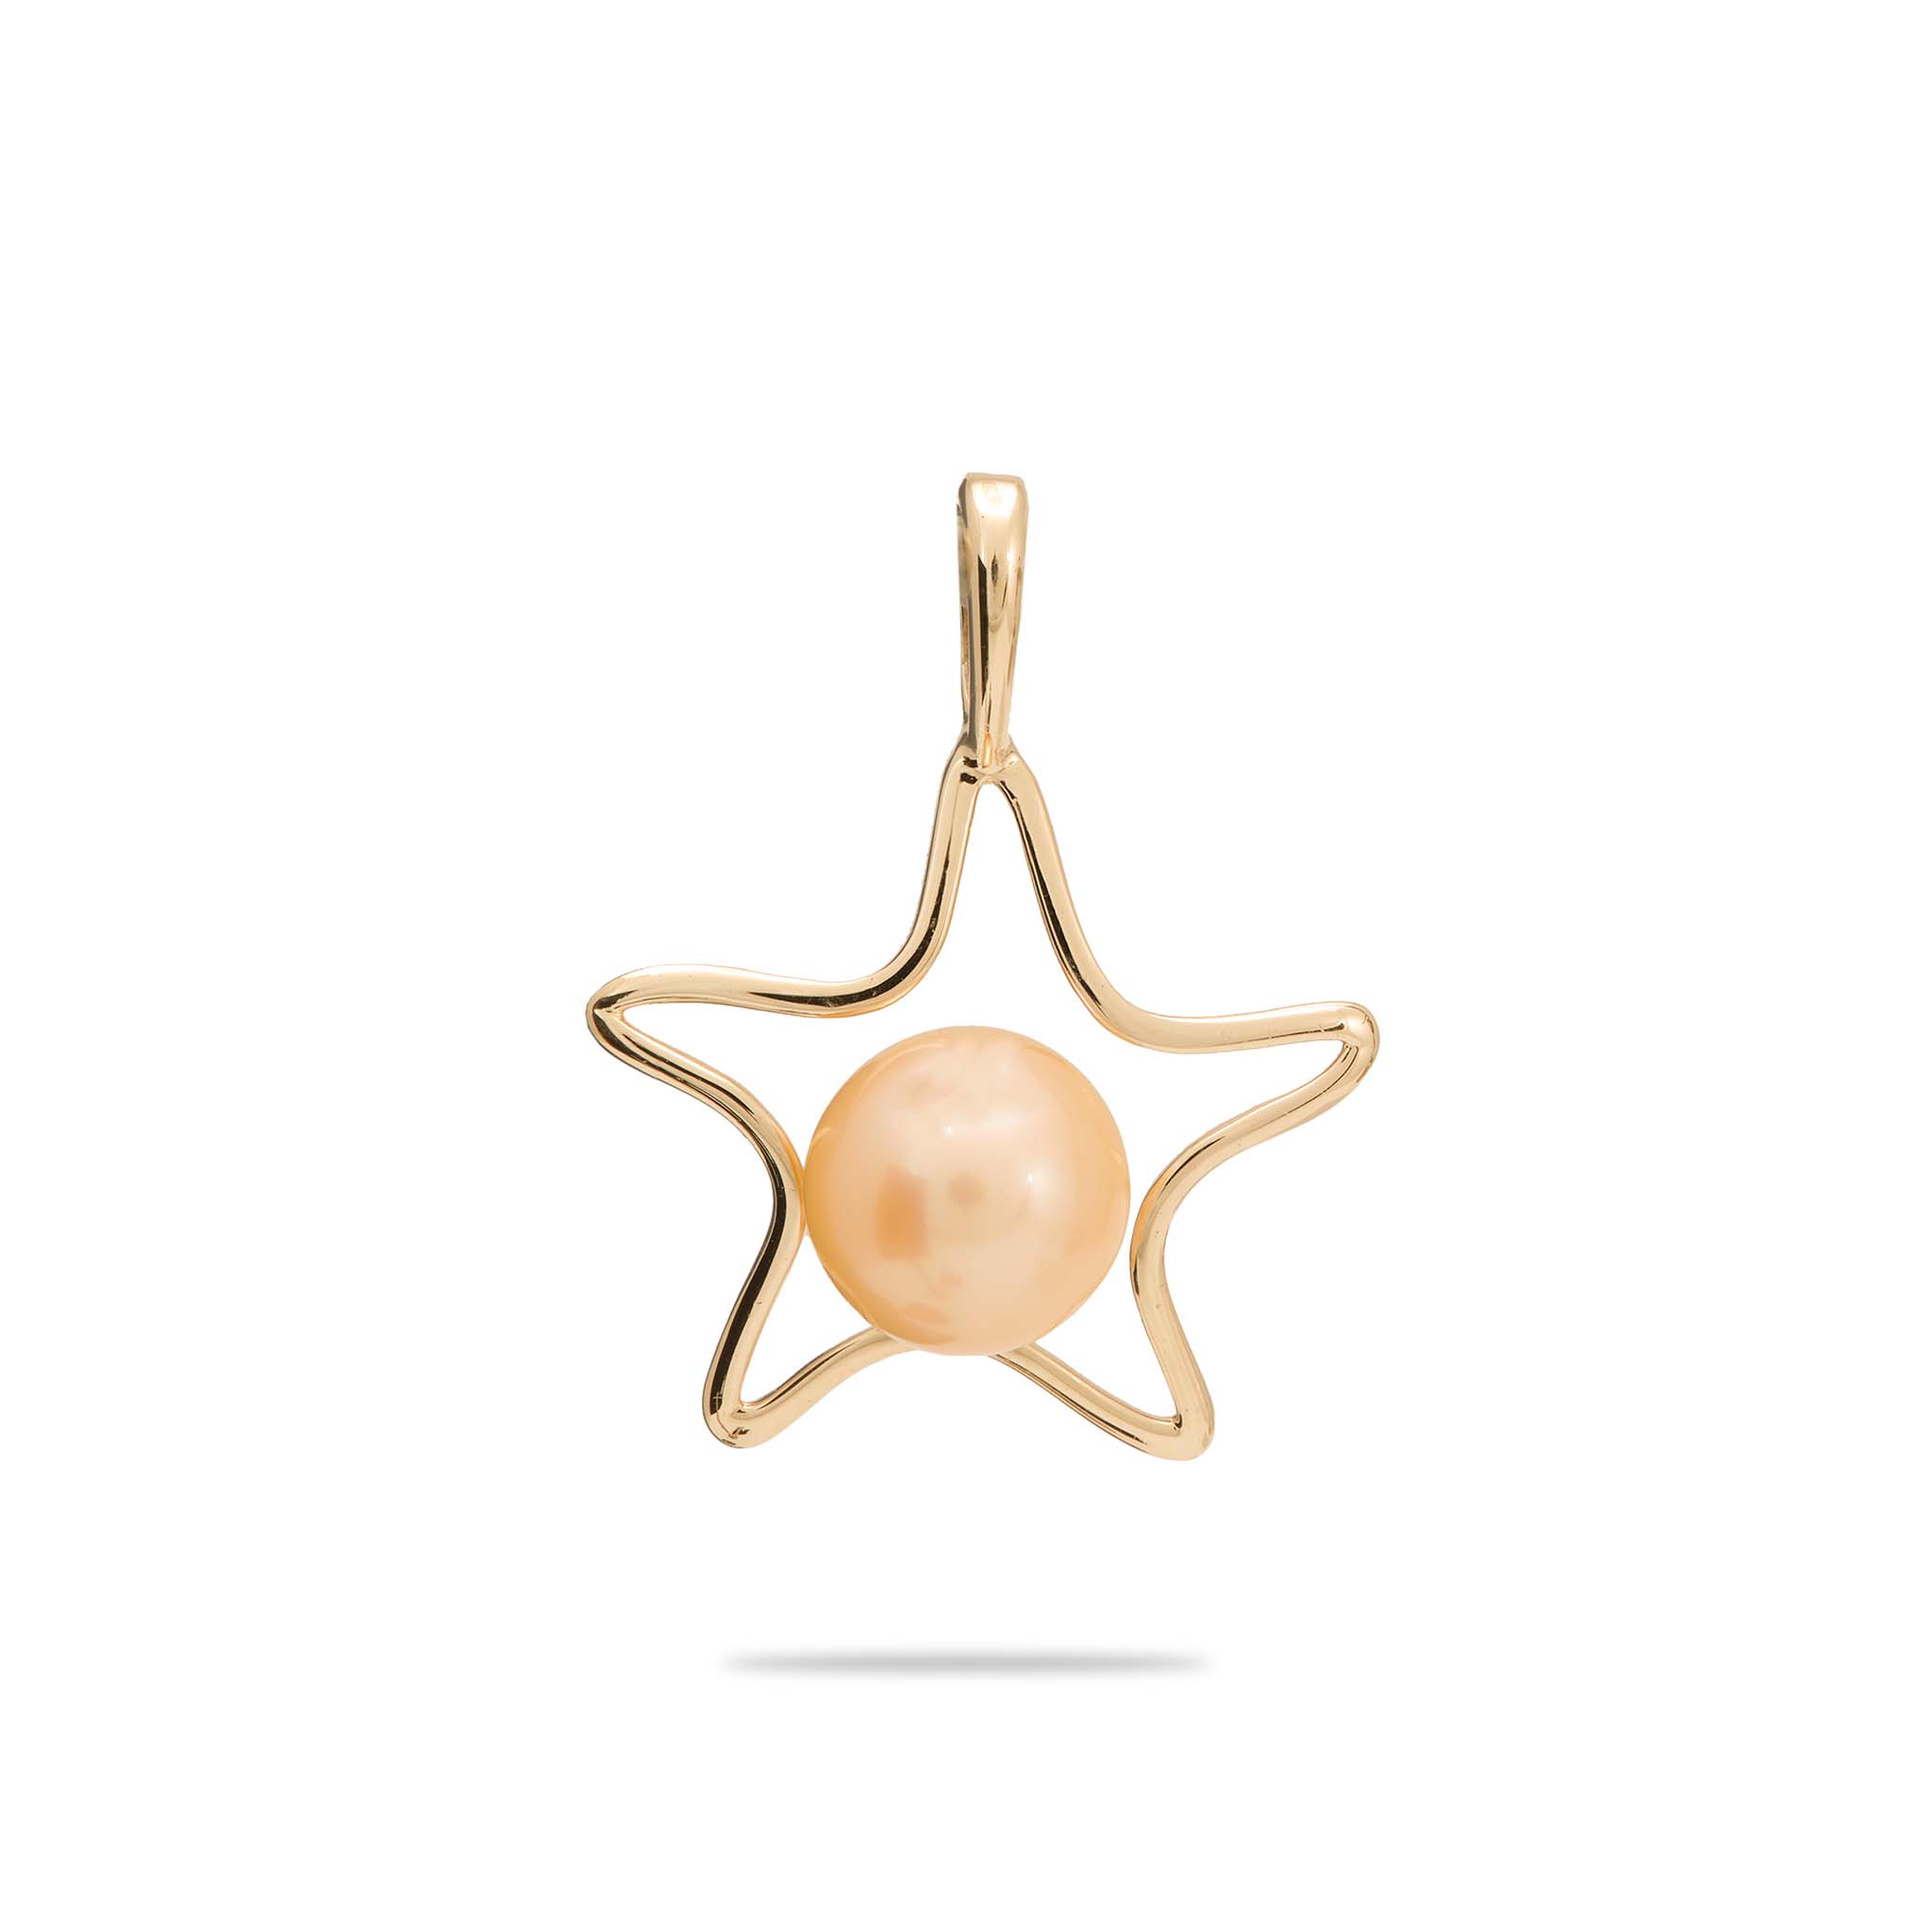 Pick A Pearl Starfish Pendant in Gold - 15mm with Peach Pearl - Maui Divers Jewelry